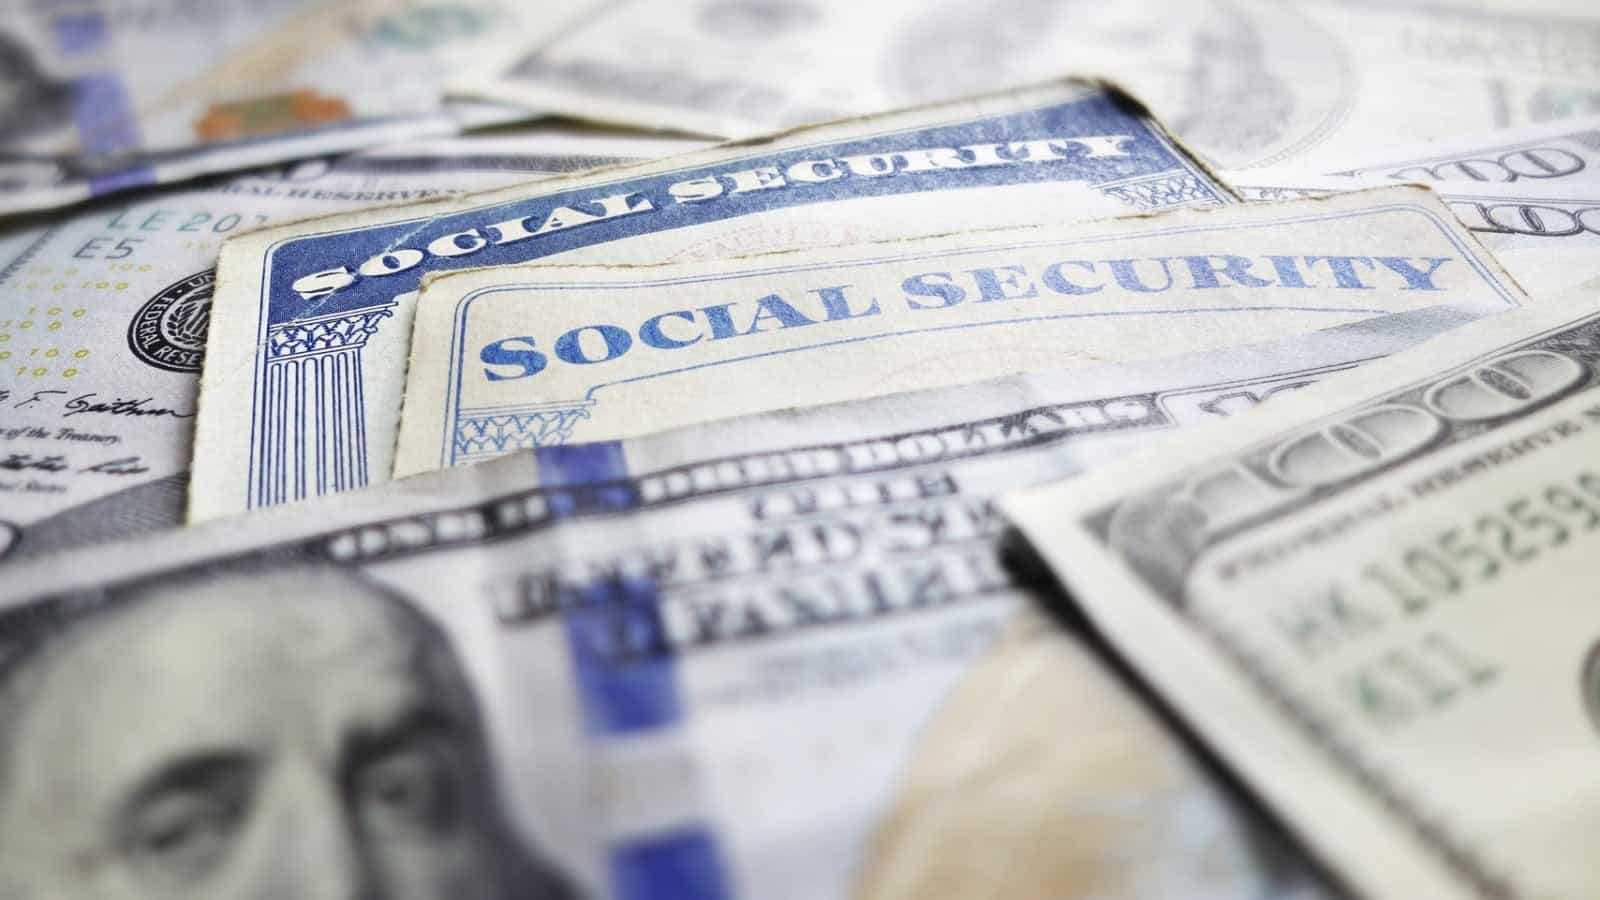 $100 Bills With Social Security Cards Stock Photo